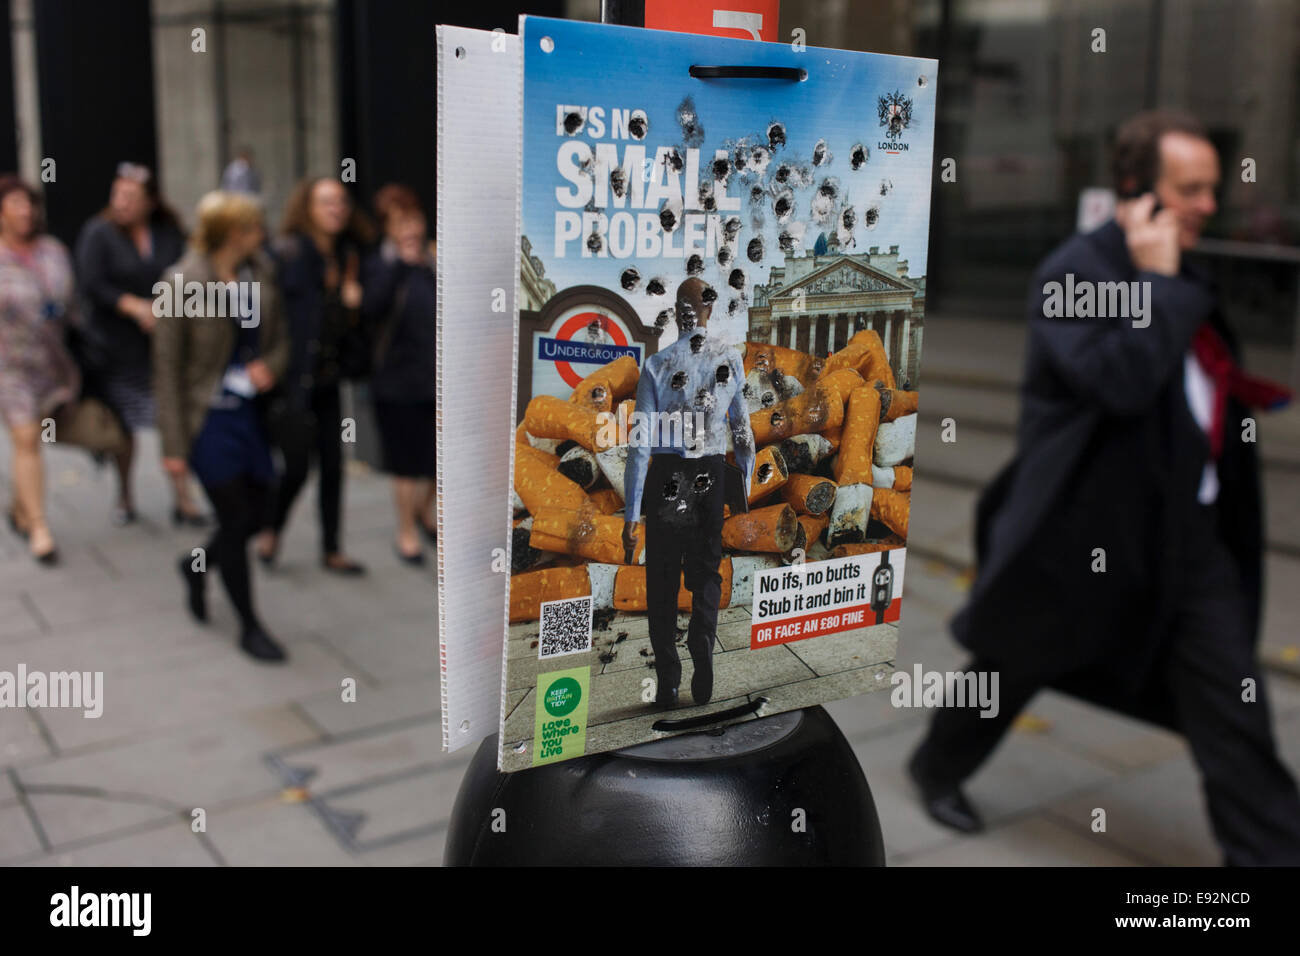 City of London (corporation) anti-butts litter campaign with burn holes from stubbed out cigarattes. Stock Photo